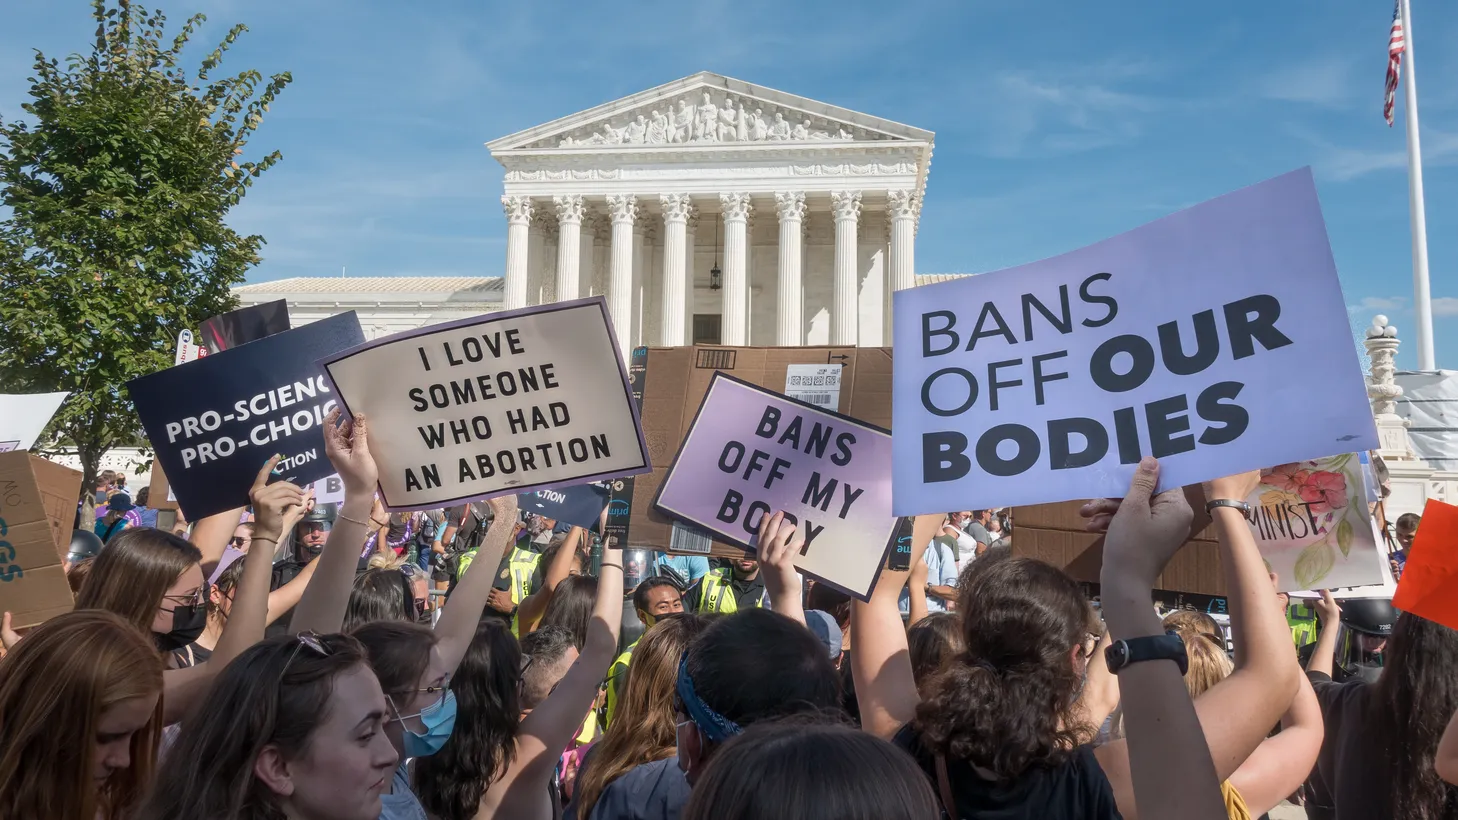 Abortion rights protestors demonstrate at the U.S. Supreme Court, which cited “history” as a reason to overturn Roe v. Wade.